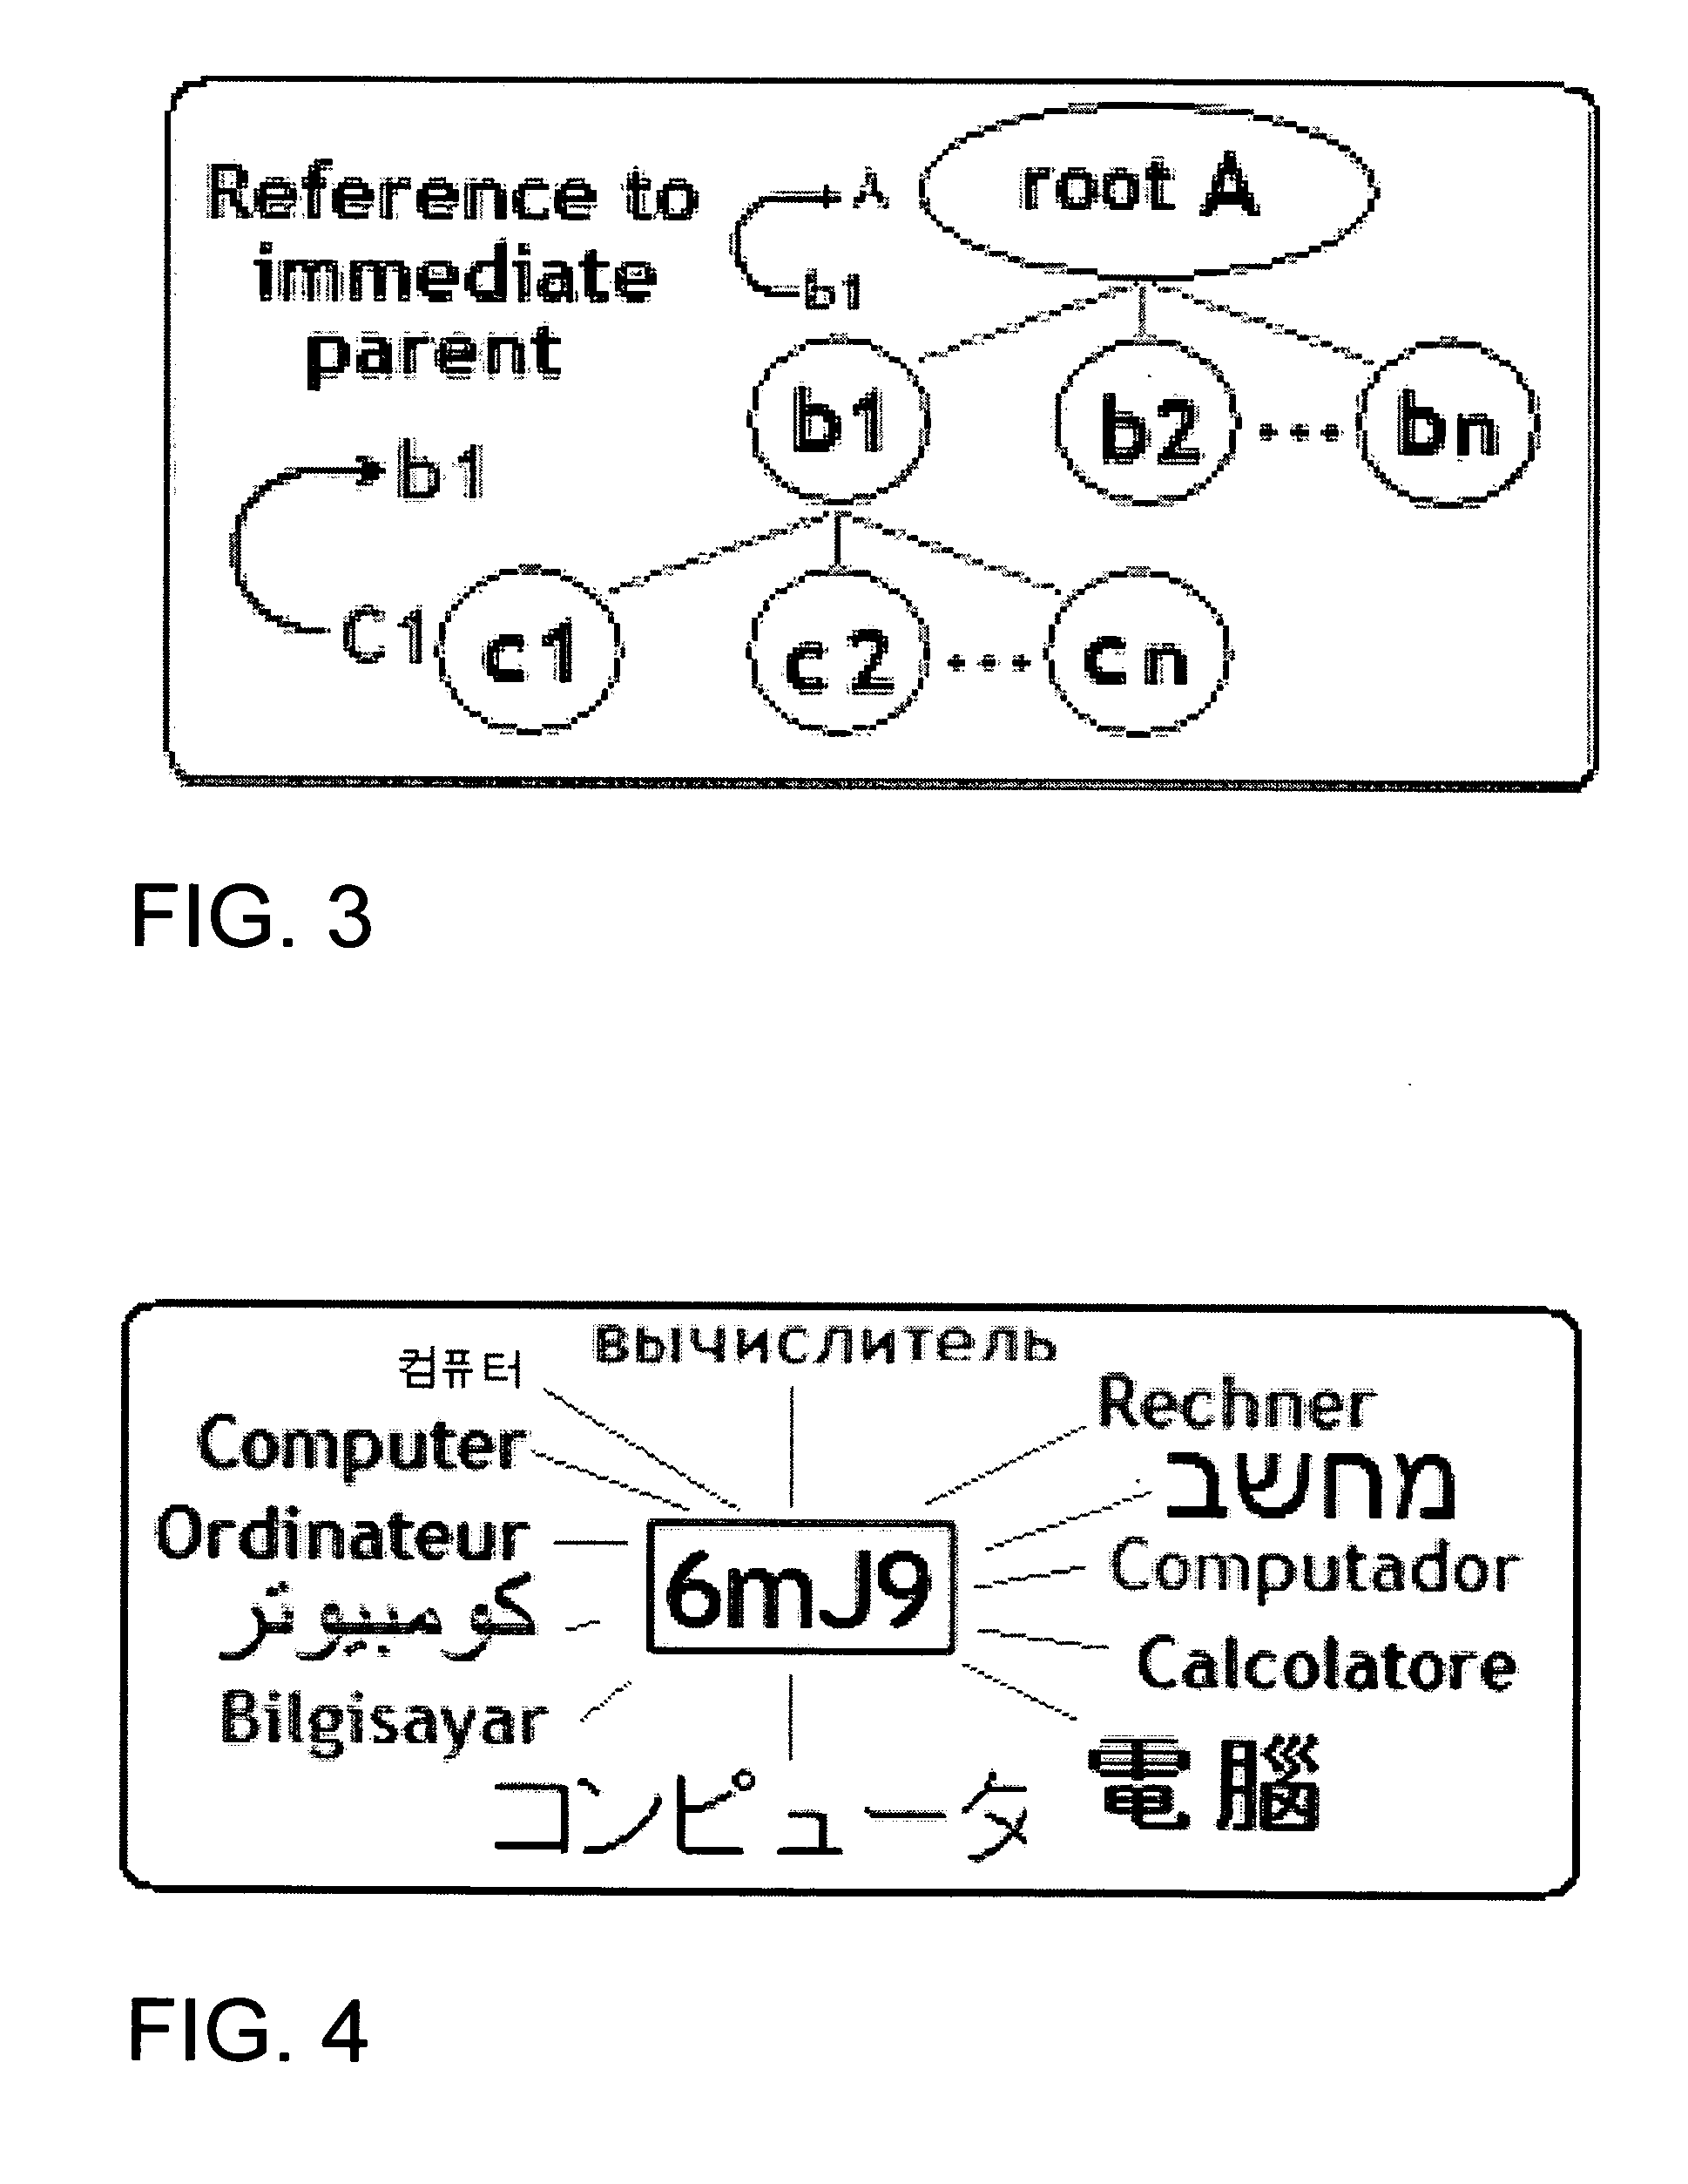 Machine-processable global knowledge representation system and method using an extensible markup language consisting of natural language-independent BASE64-encoded words